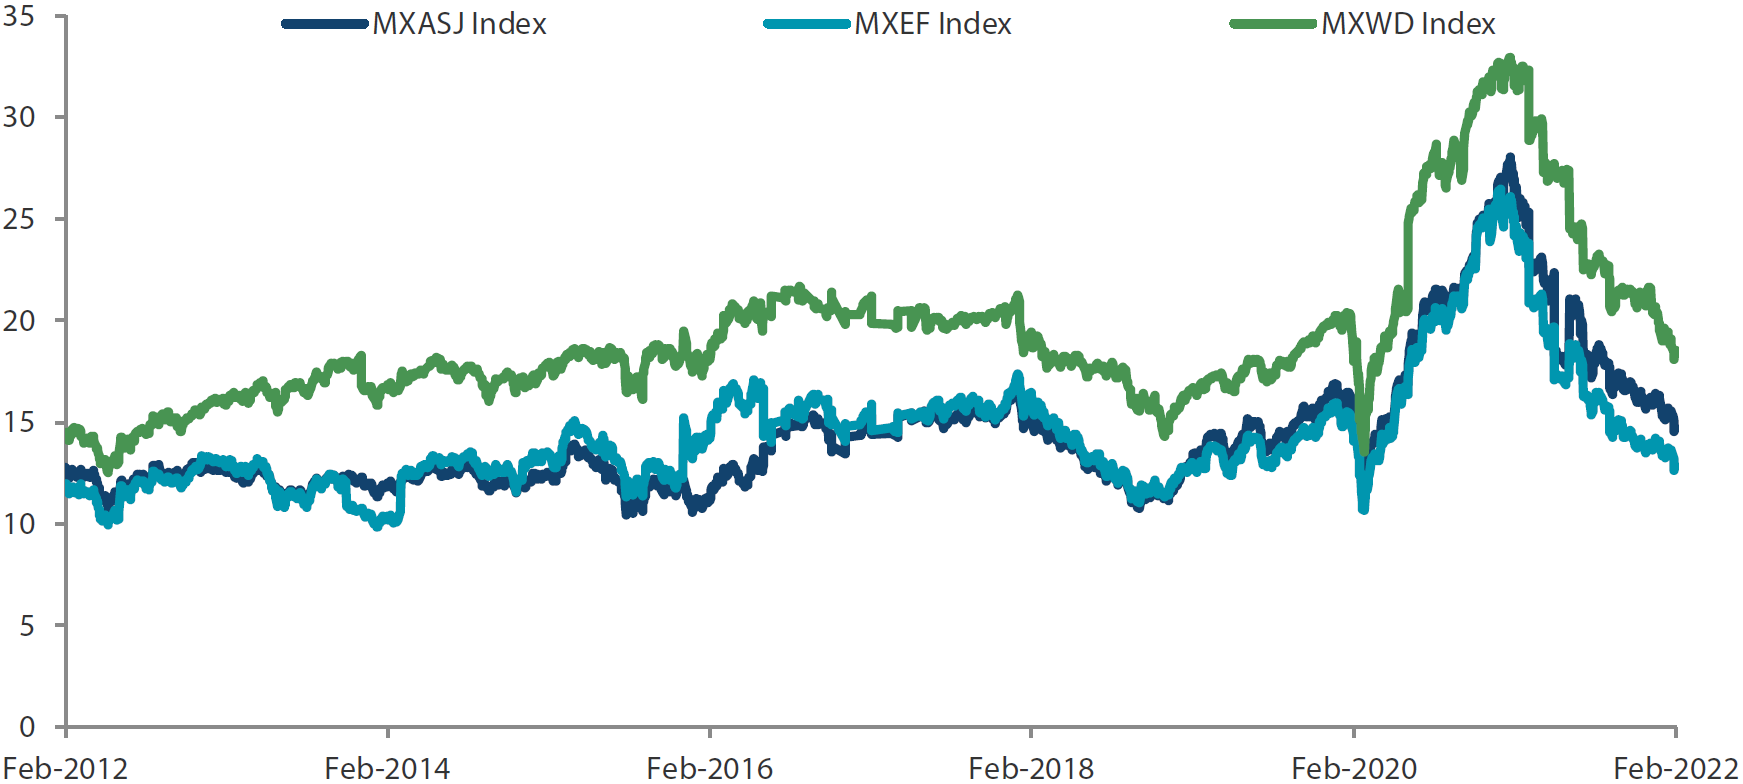 MSCI AC Asia ex Japan versus Emerging Markets versus All Country World Index price-to-earnings